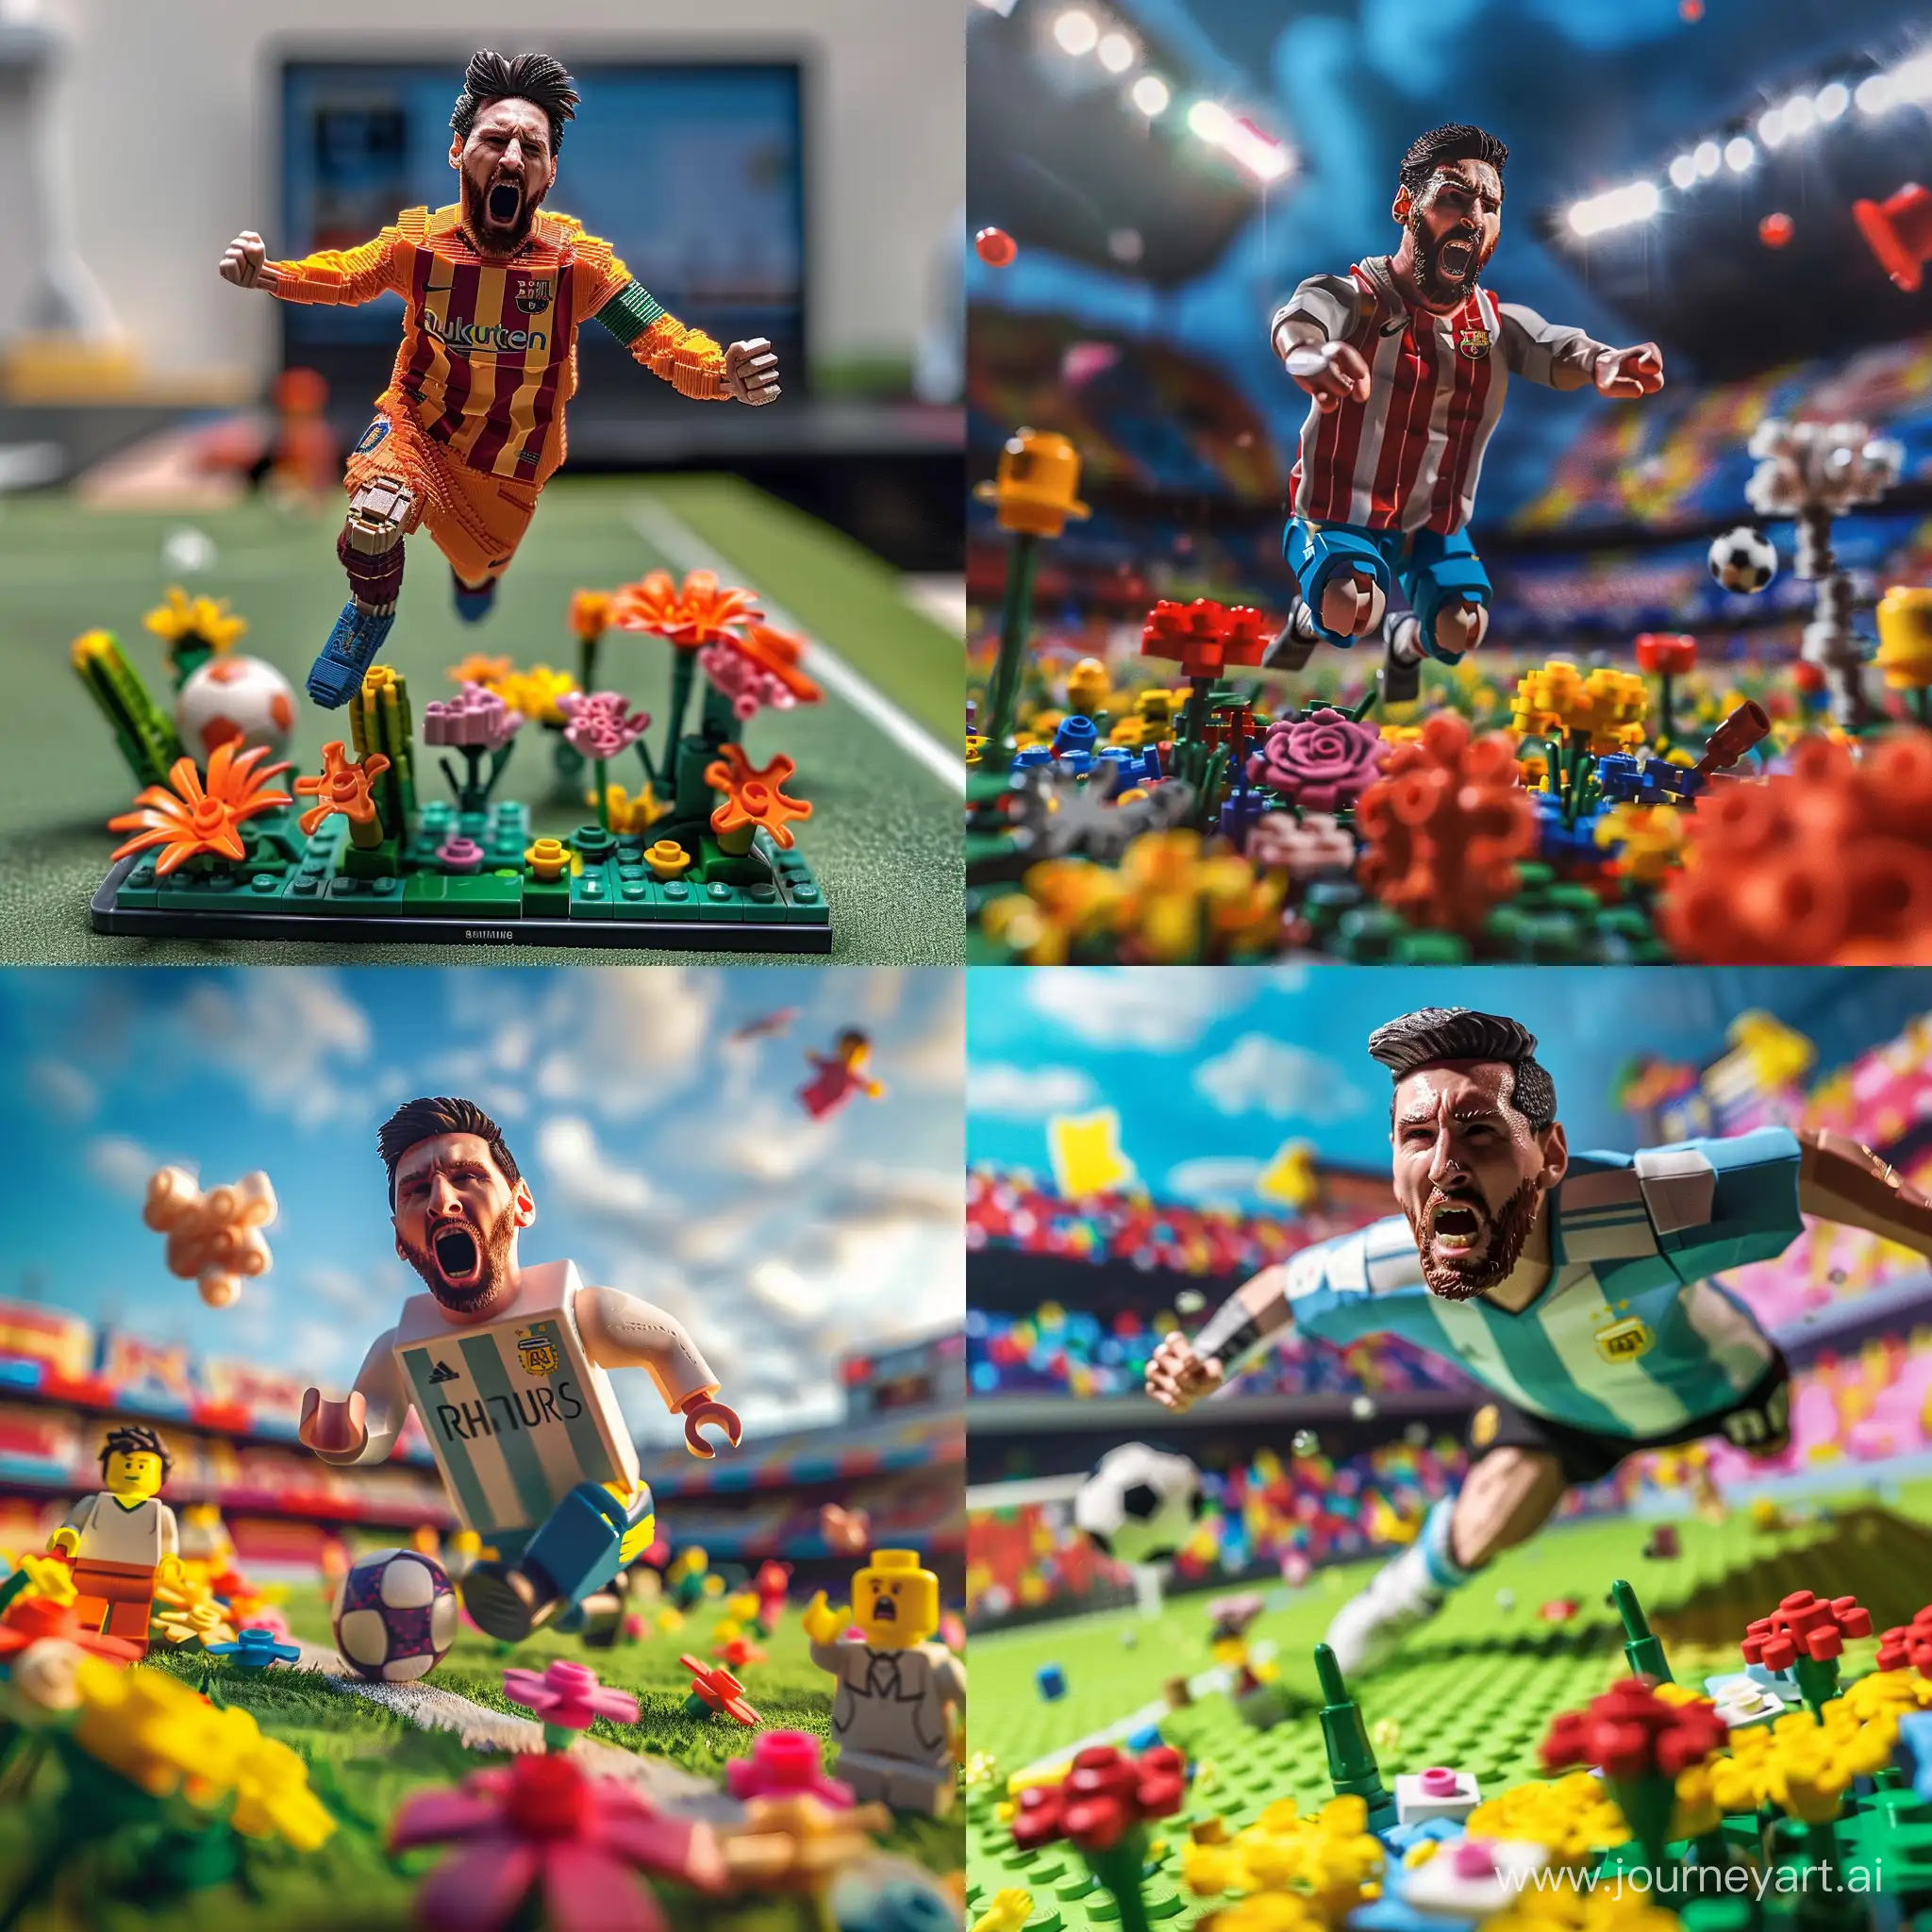 Realistic very detailed photo made on samsung phone, angry Messi on the football pitch jumps on lego flowers, realistic photo